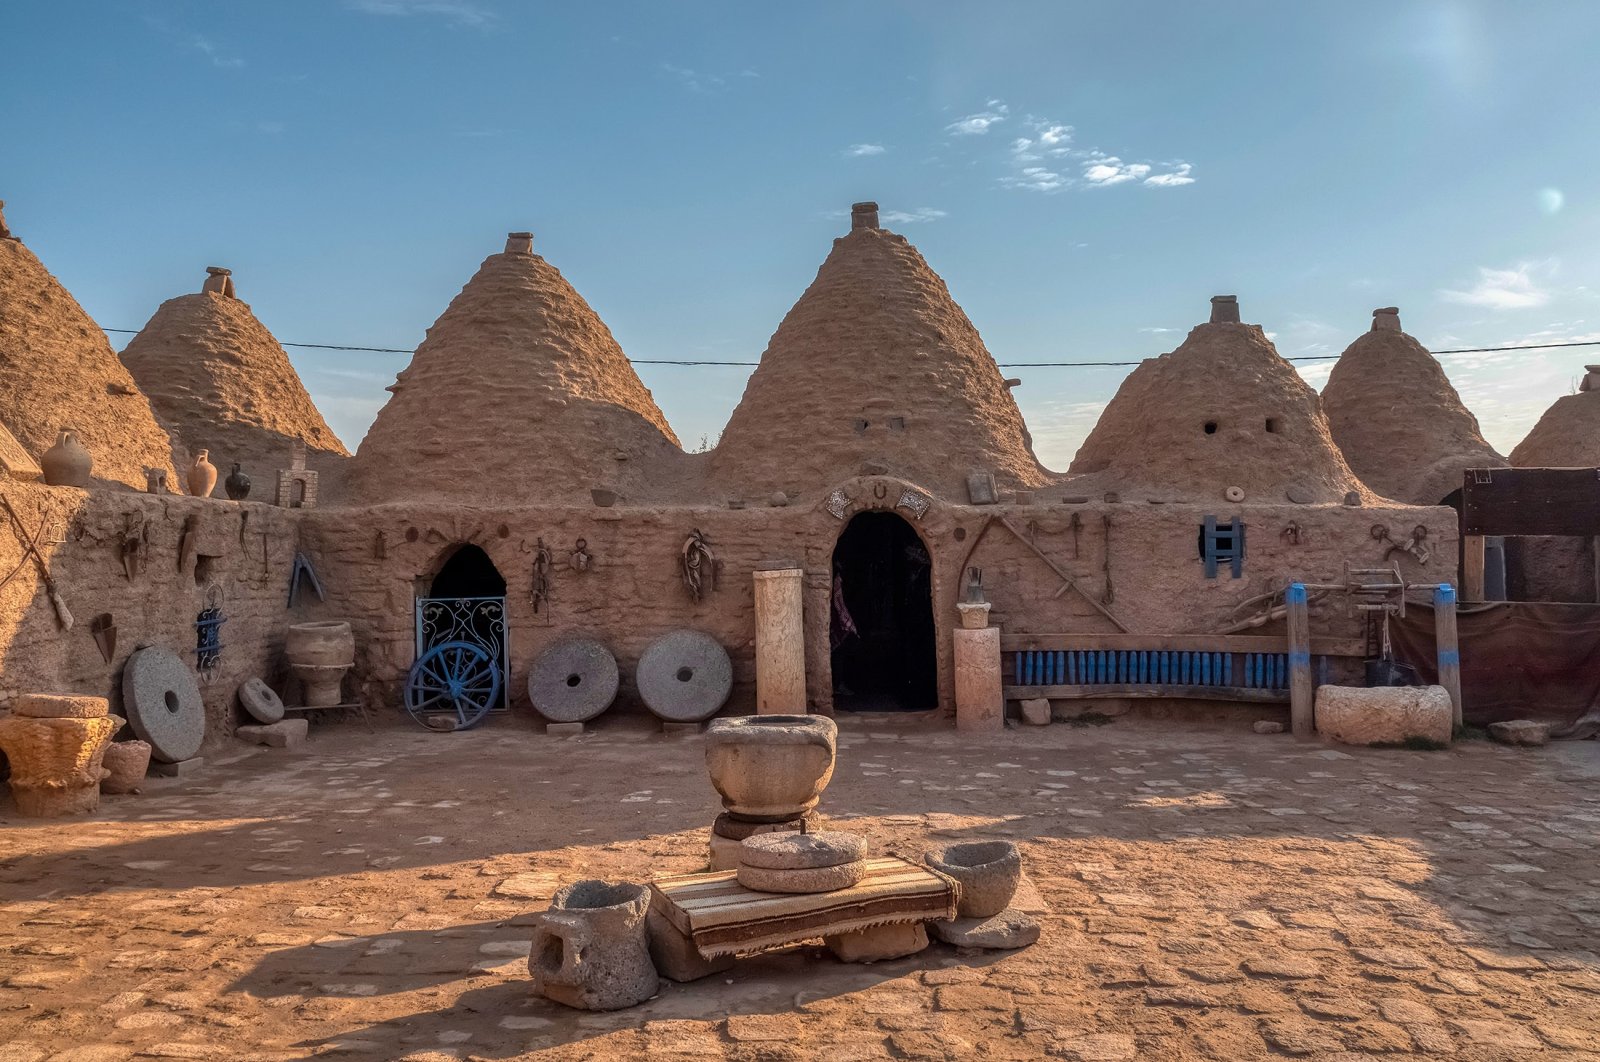 The 250-year-old conical dome houses of Şanlıurfa, Turkey. (Shutterstock Photo)